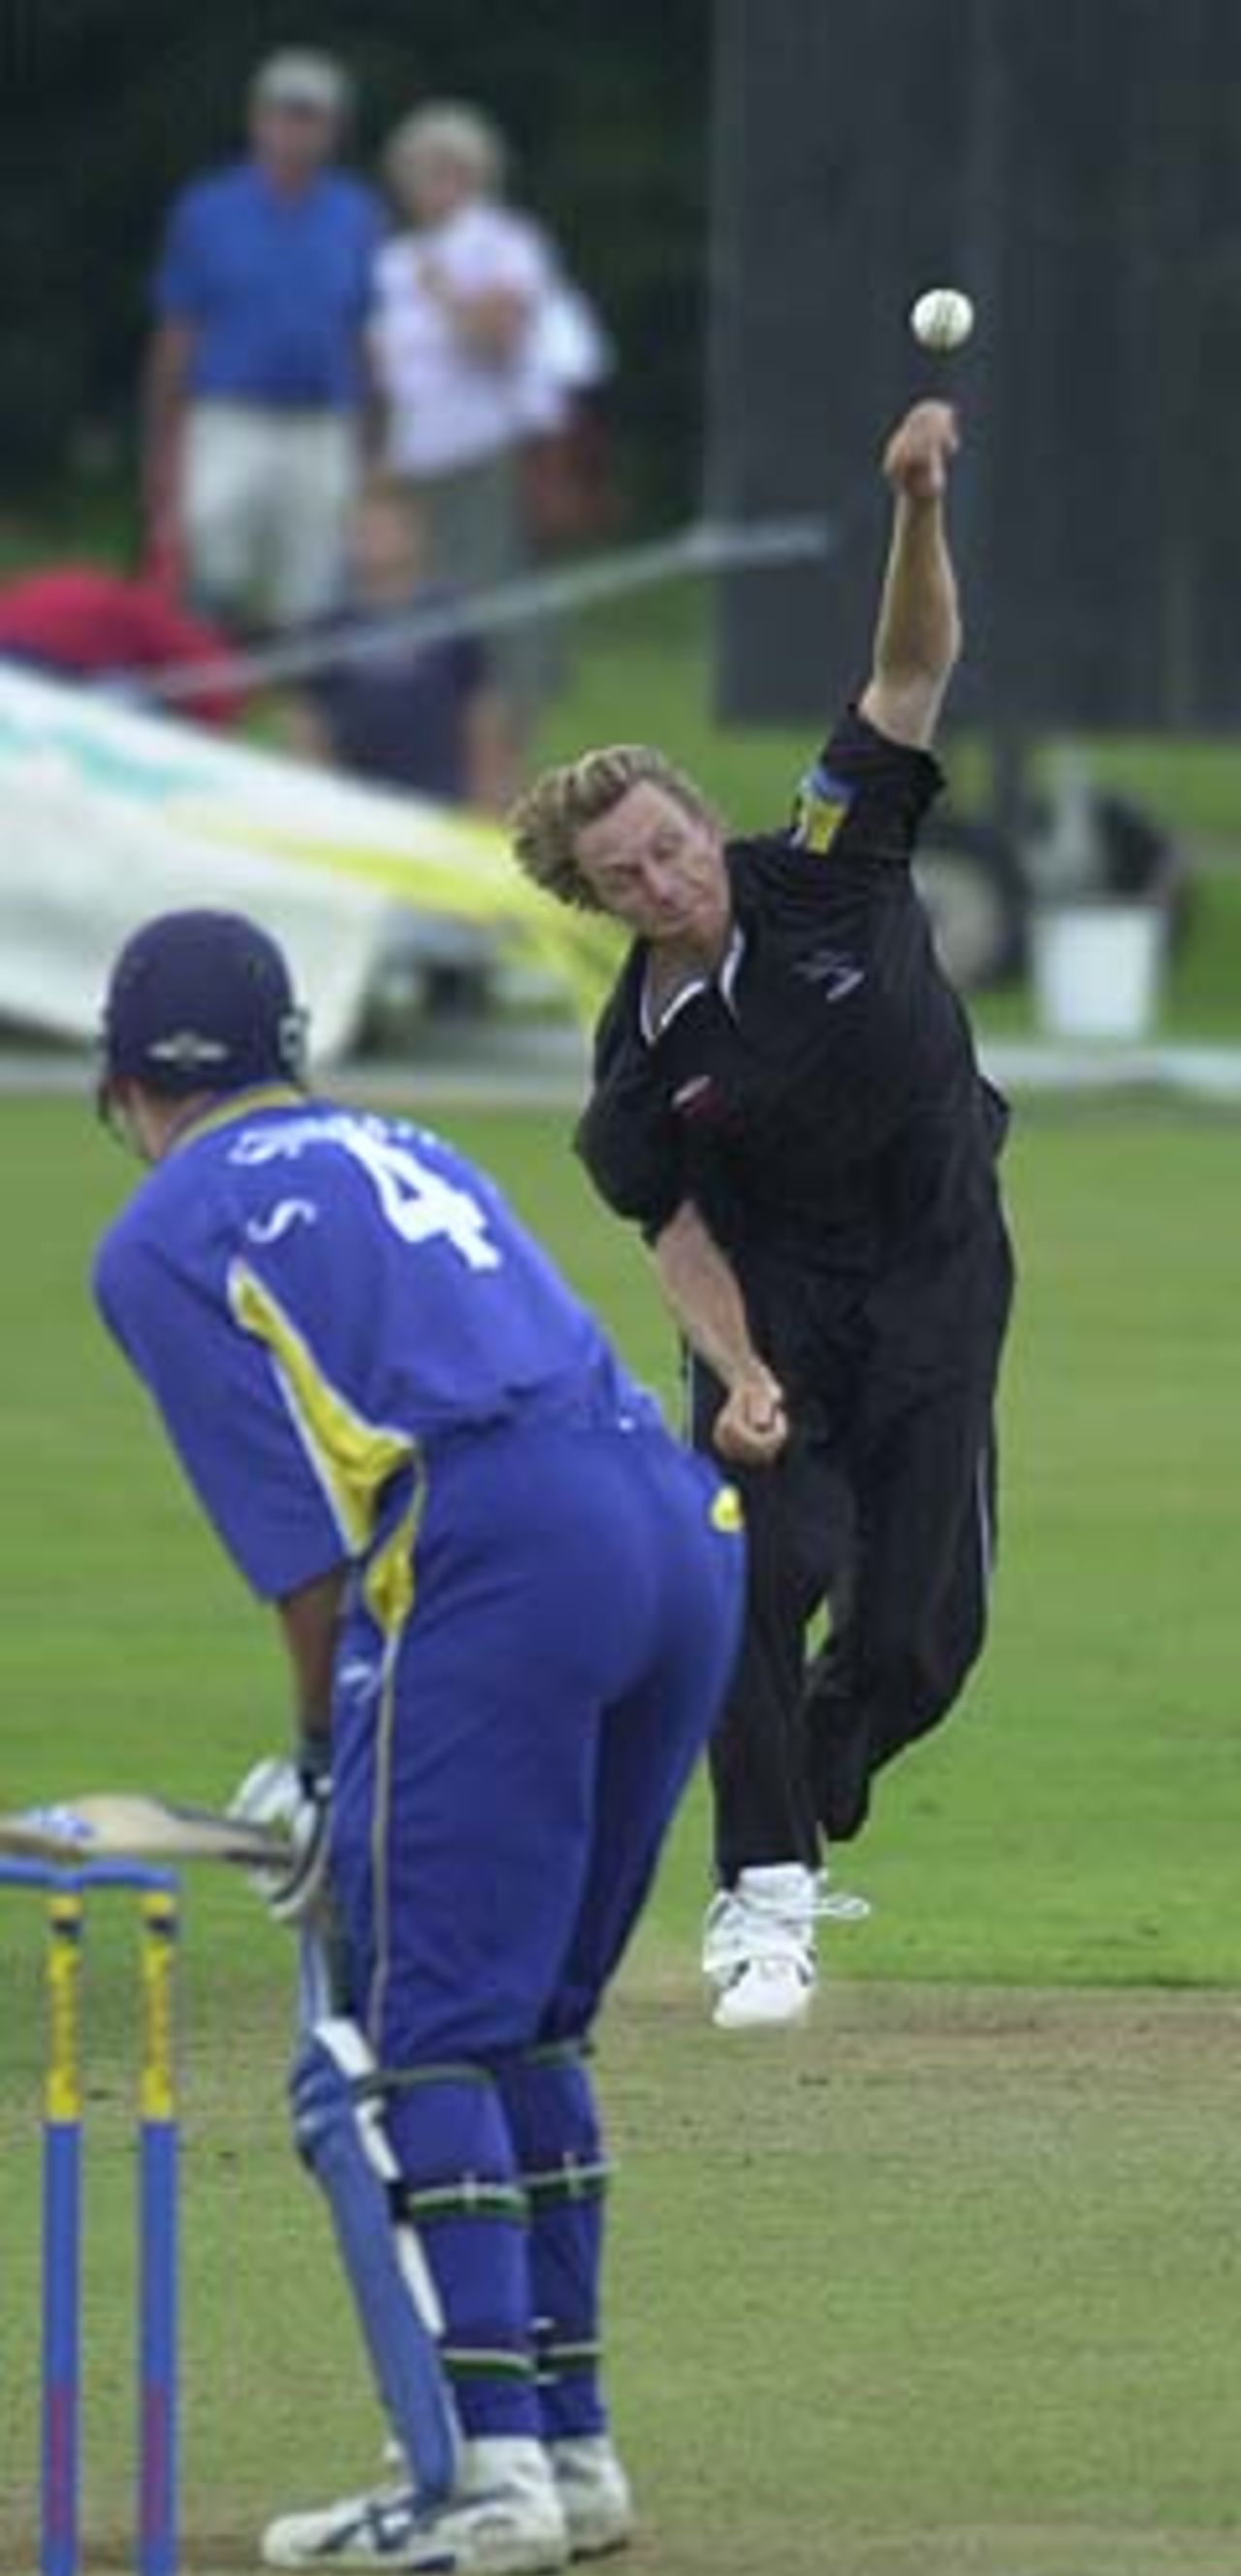 Mullally bowling from the score board end, Norwich Union League, Sat 3rd August 2002